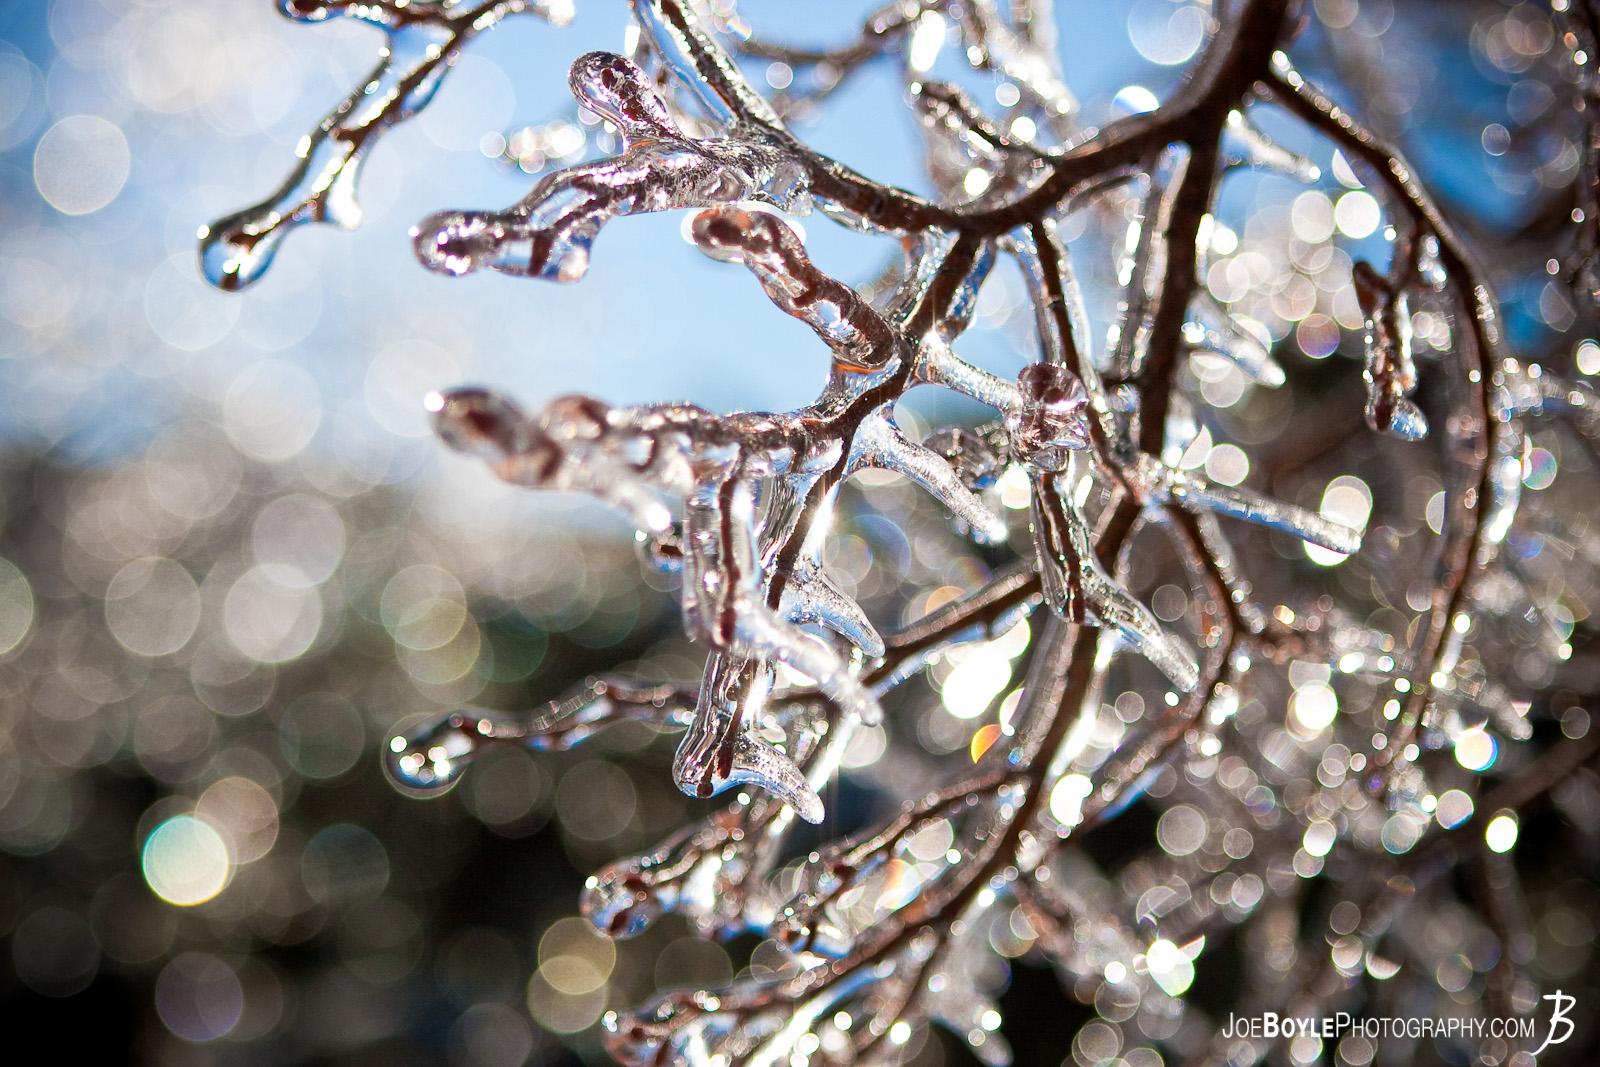  I captured this photo after an ice storm came through the Cleveland area. The storm provided some great picture opportunities that I was able to capture the following day including these tree branches coated in ice! 